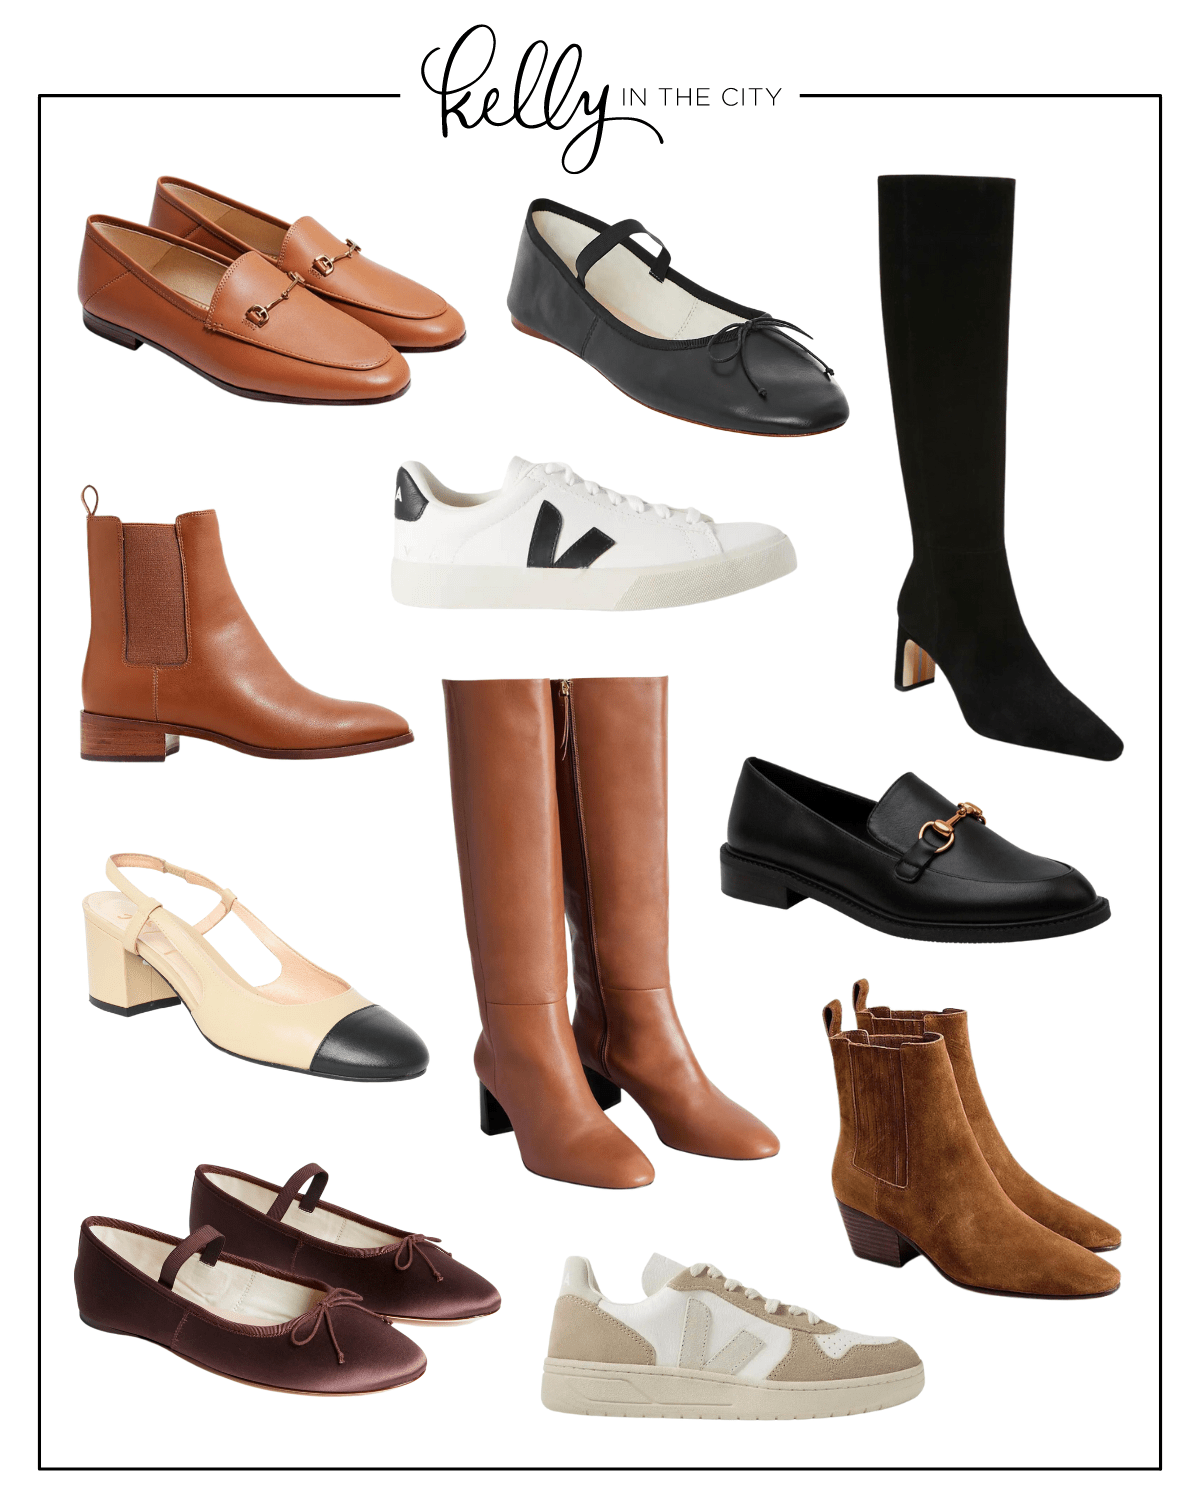 Fall shoes from loafers to ballet flats to boots to sneakers